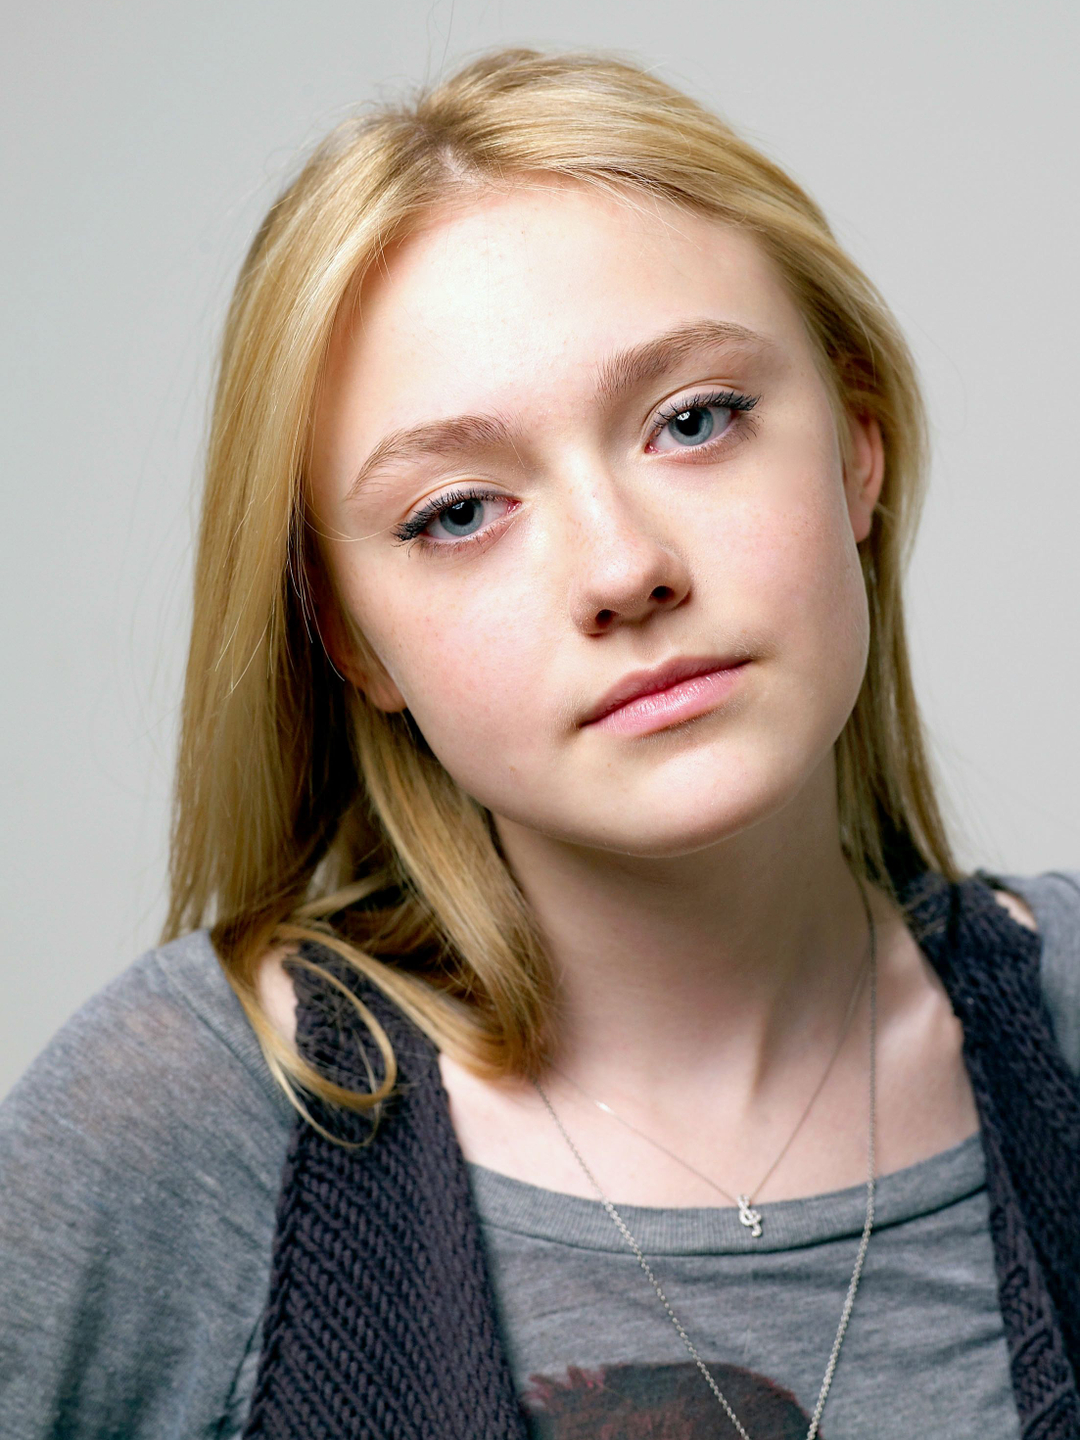 Dakota Fanning who are her parents